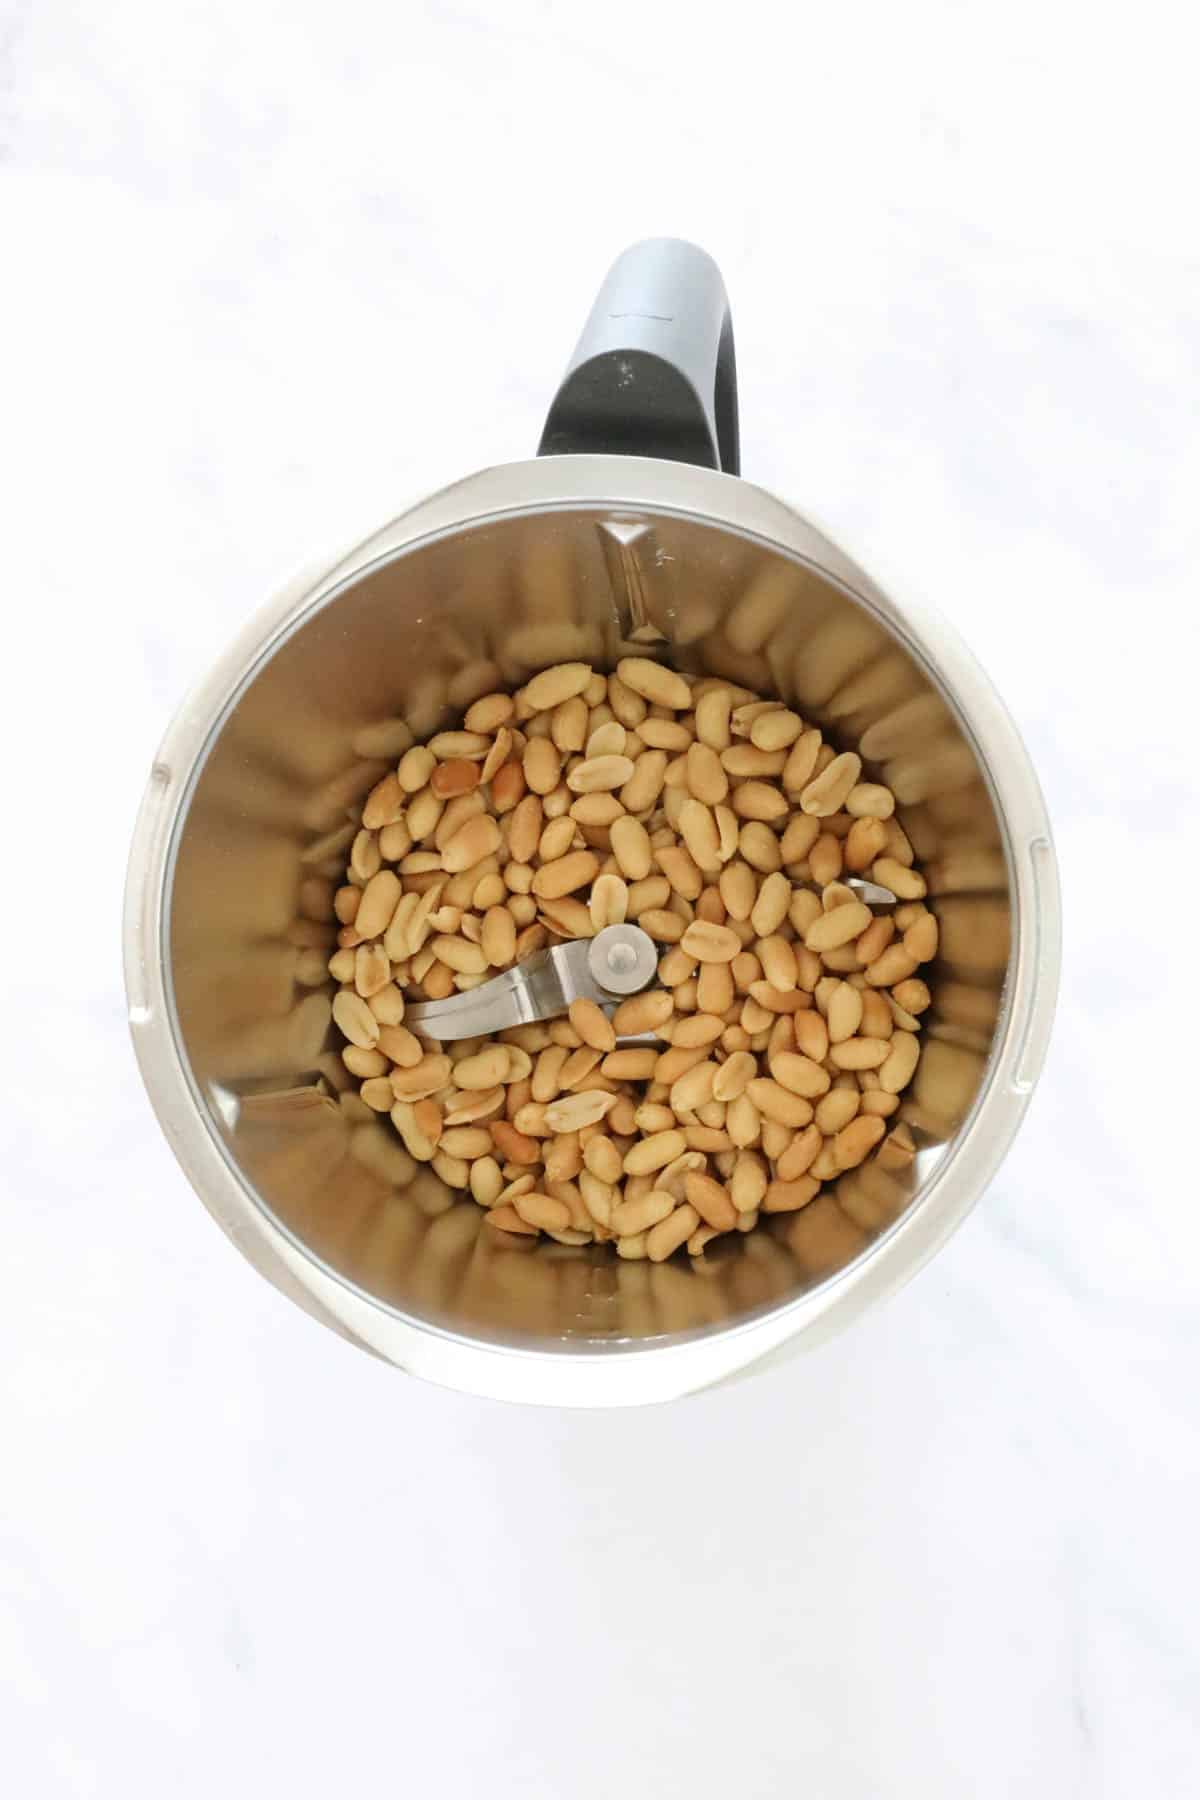 Peanuts in a Thermomix